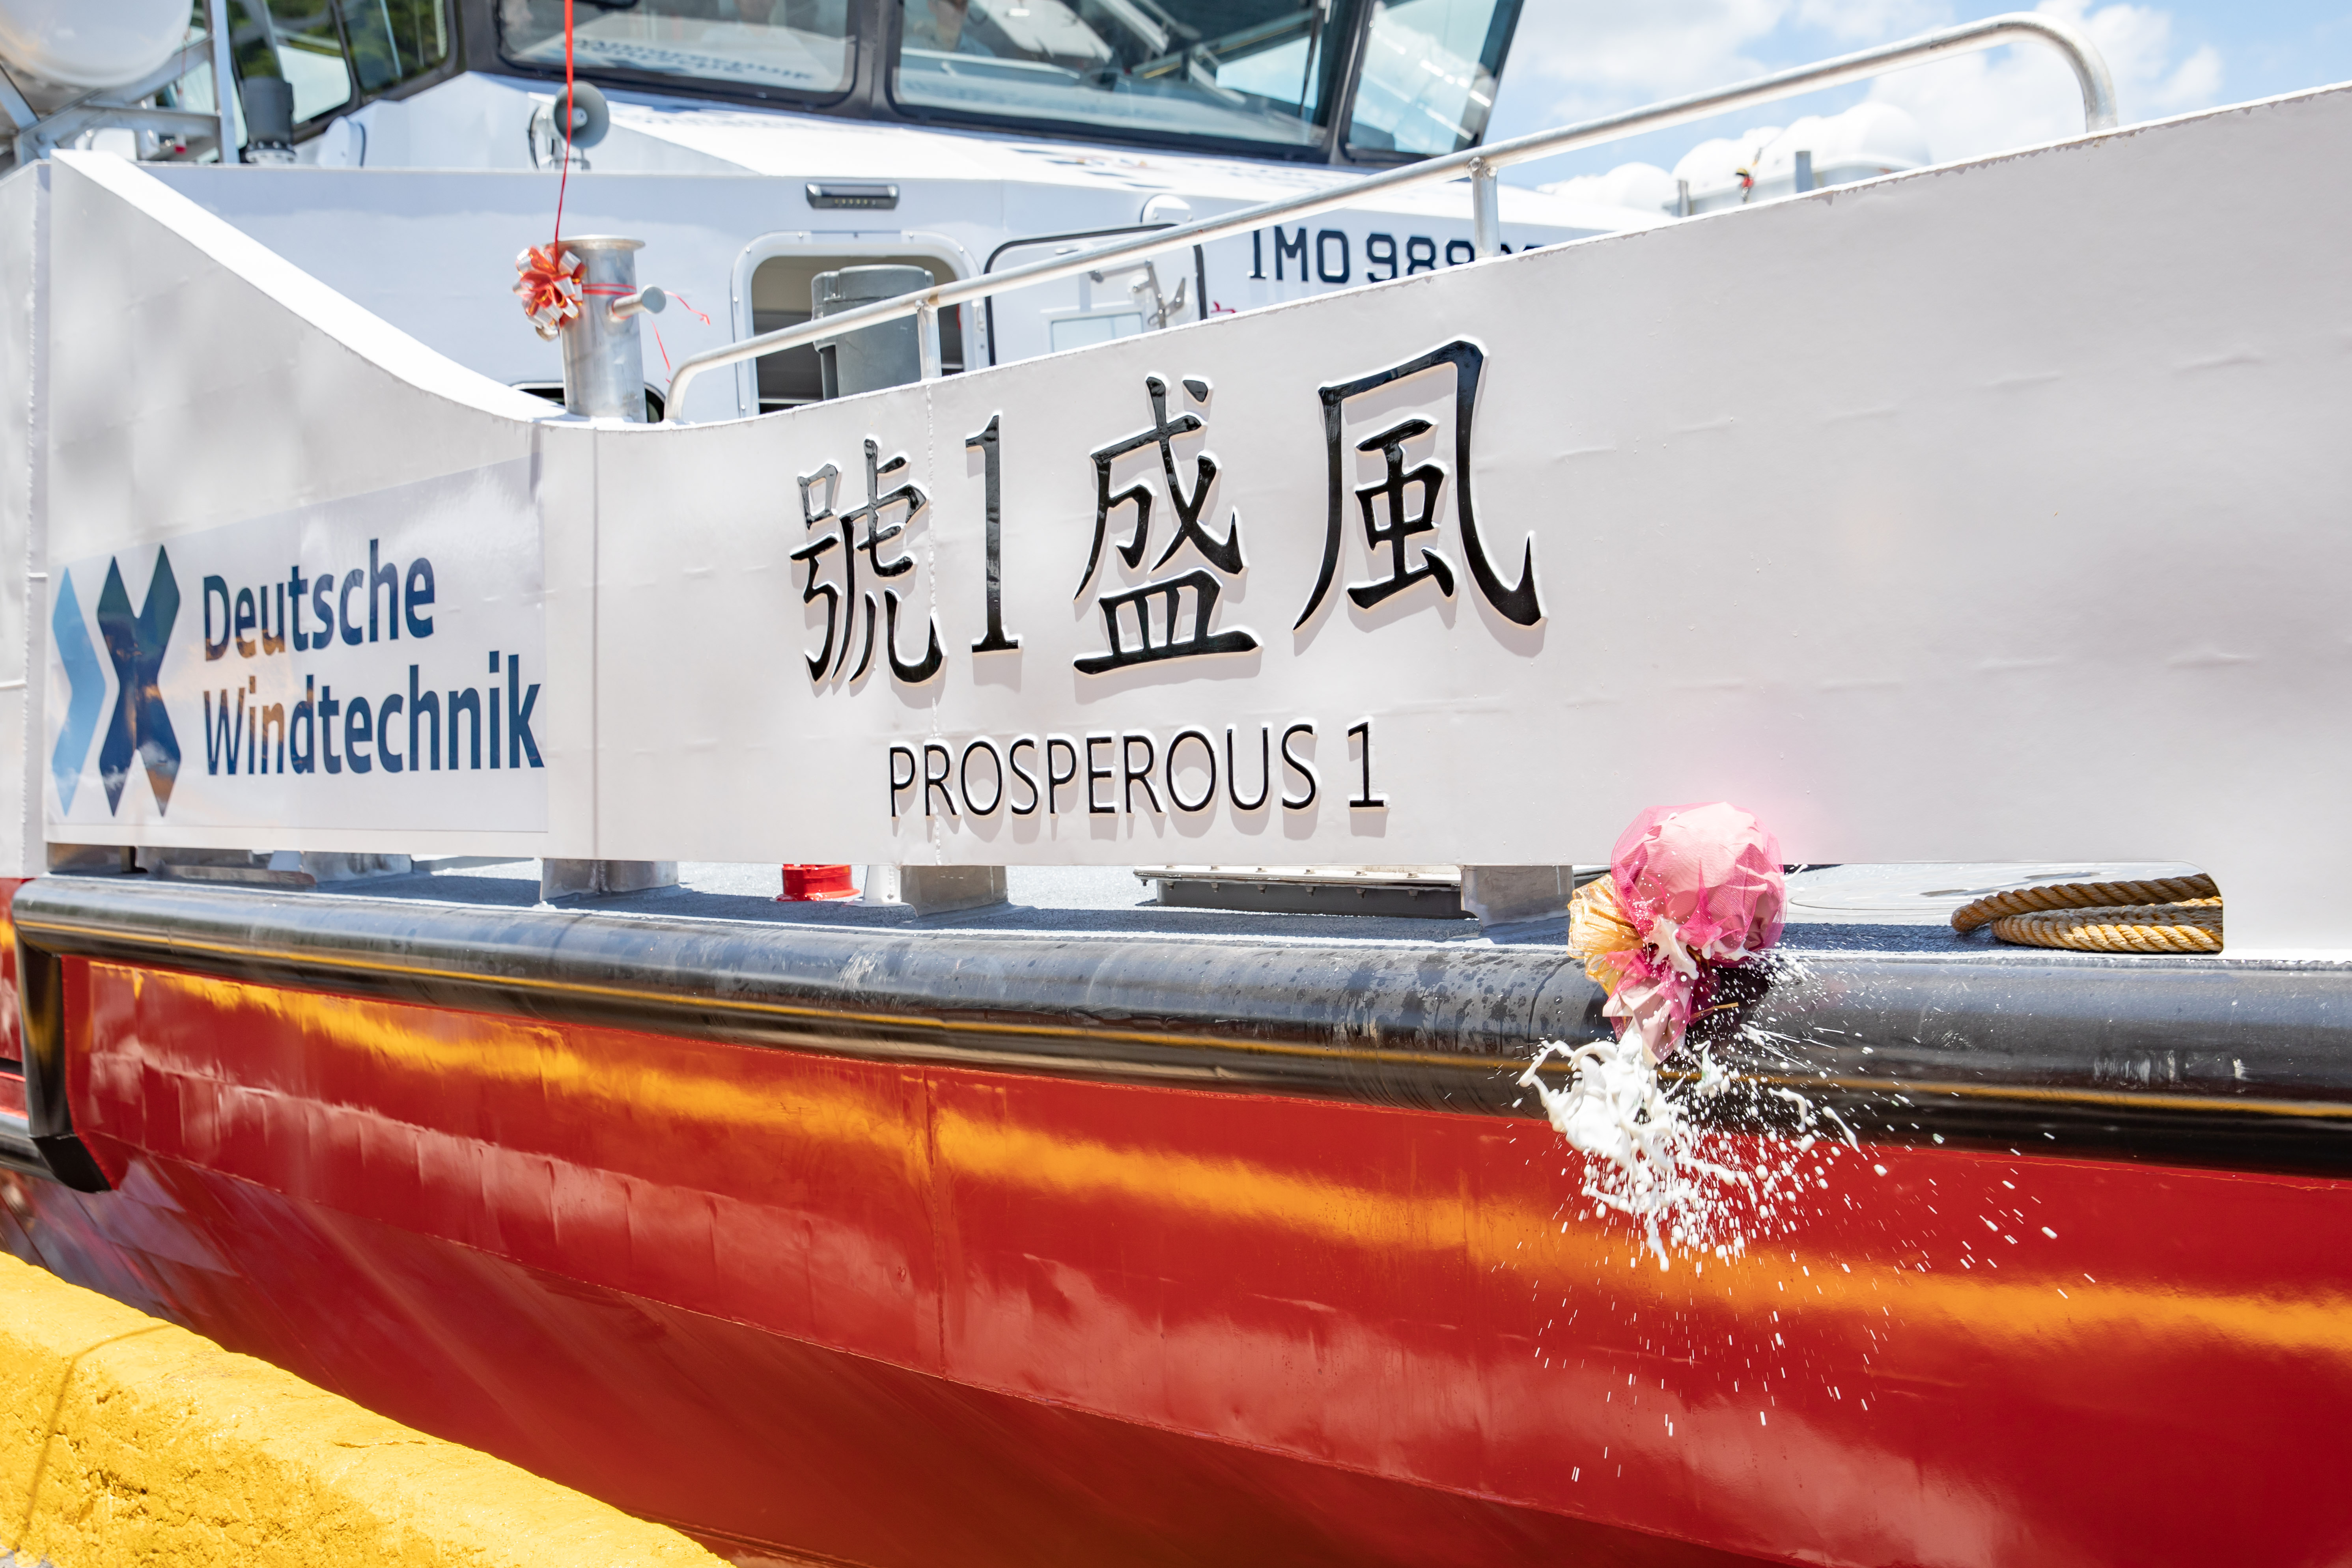 A close-up of Prosperous 1 vessel name on the portside